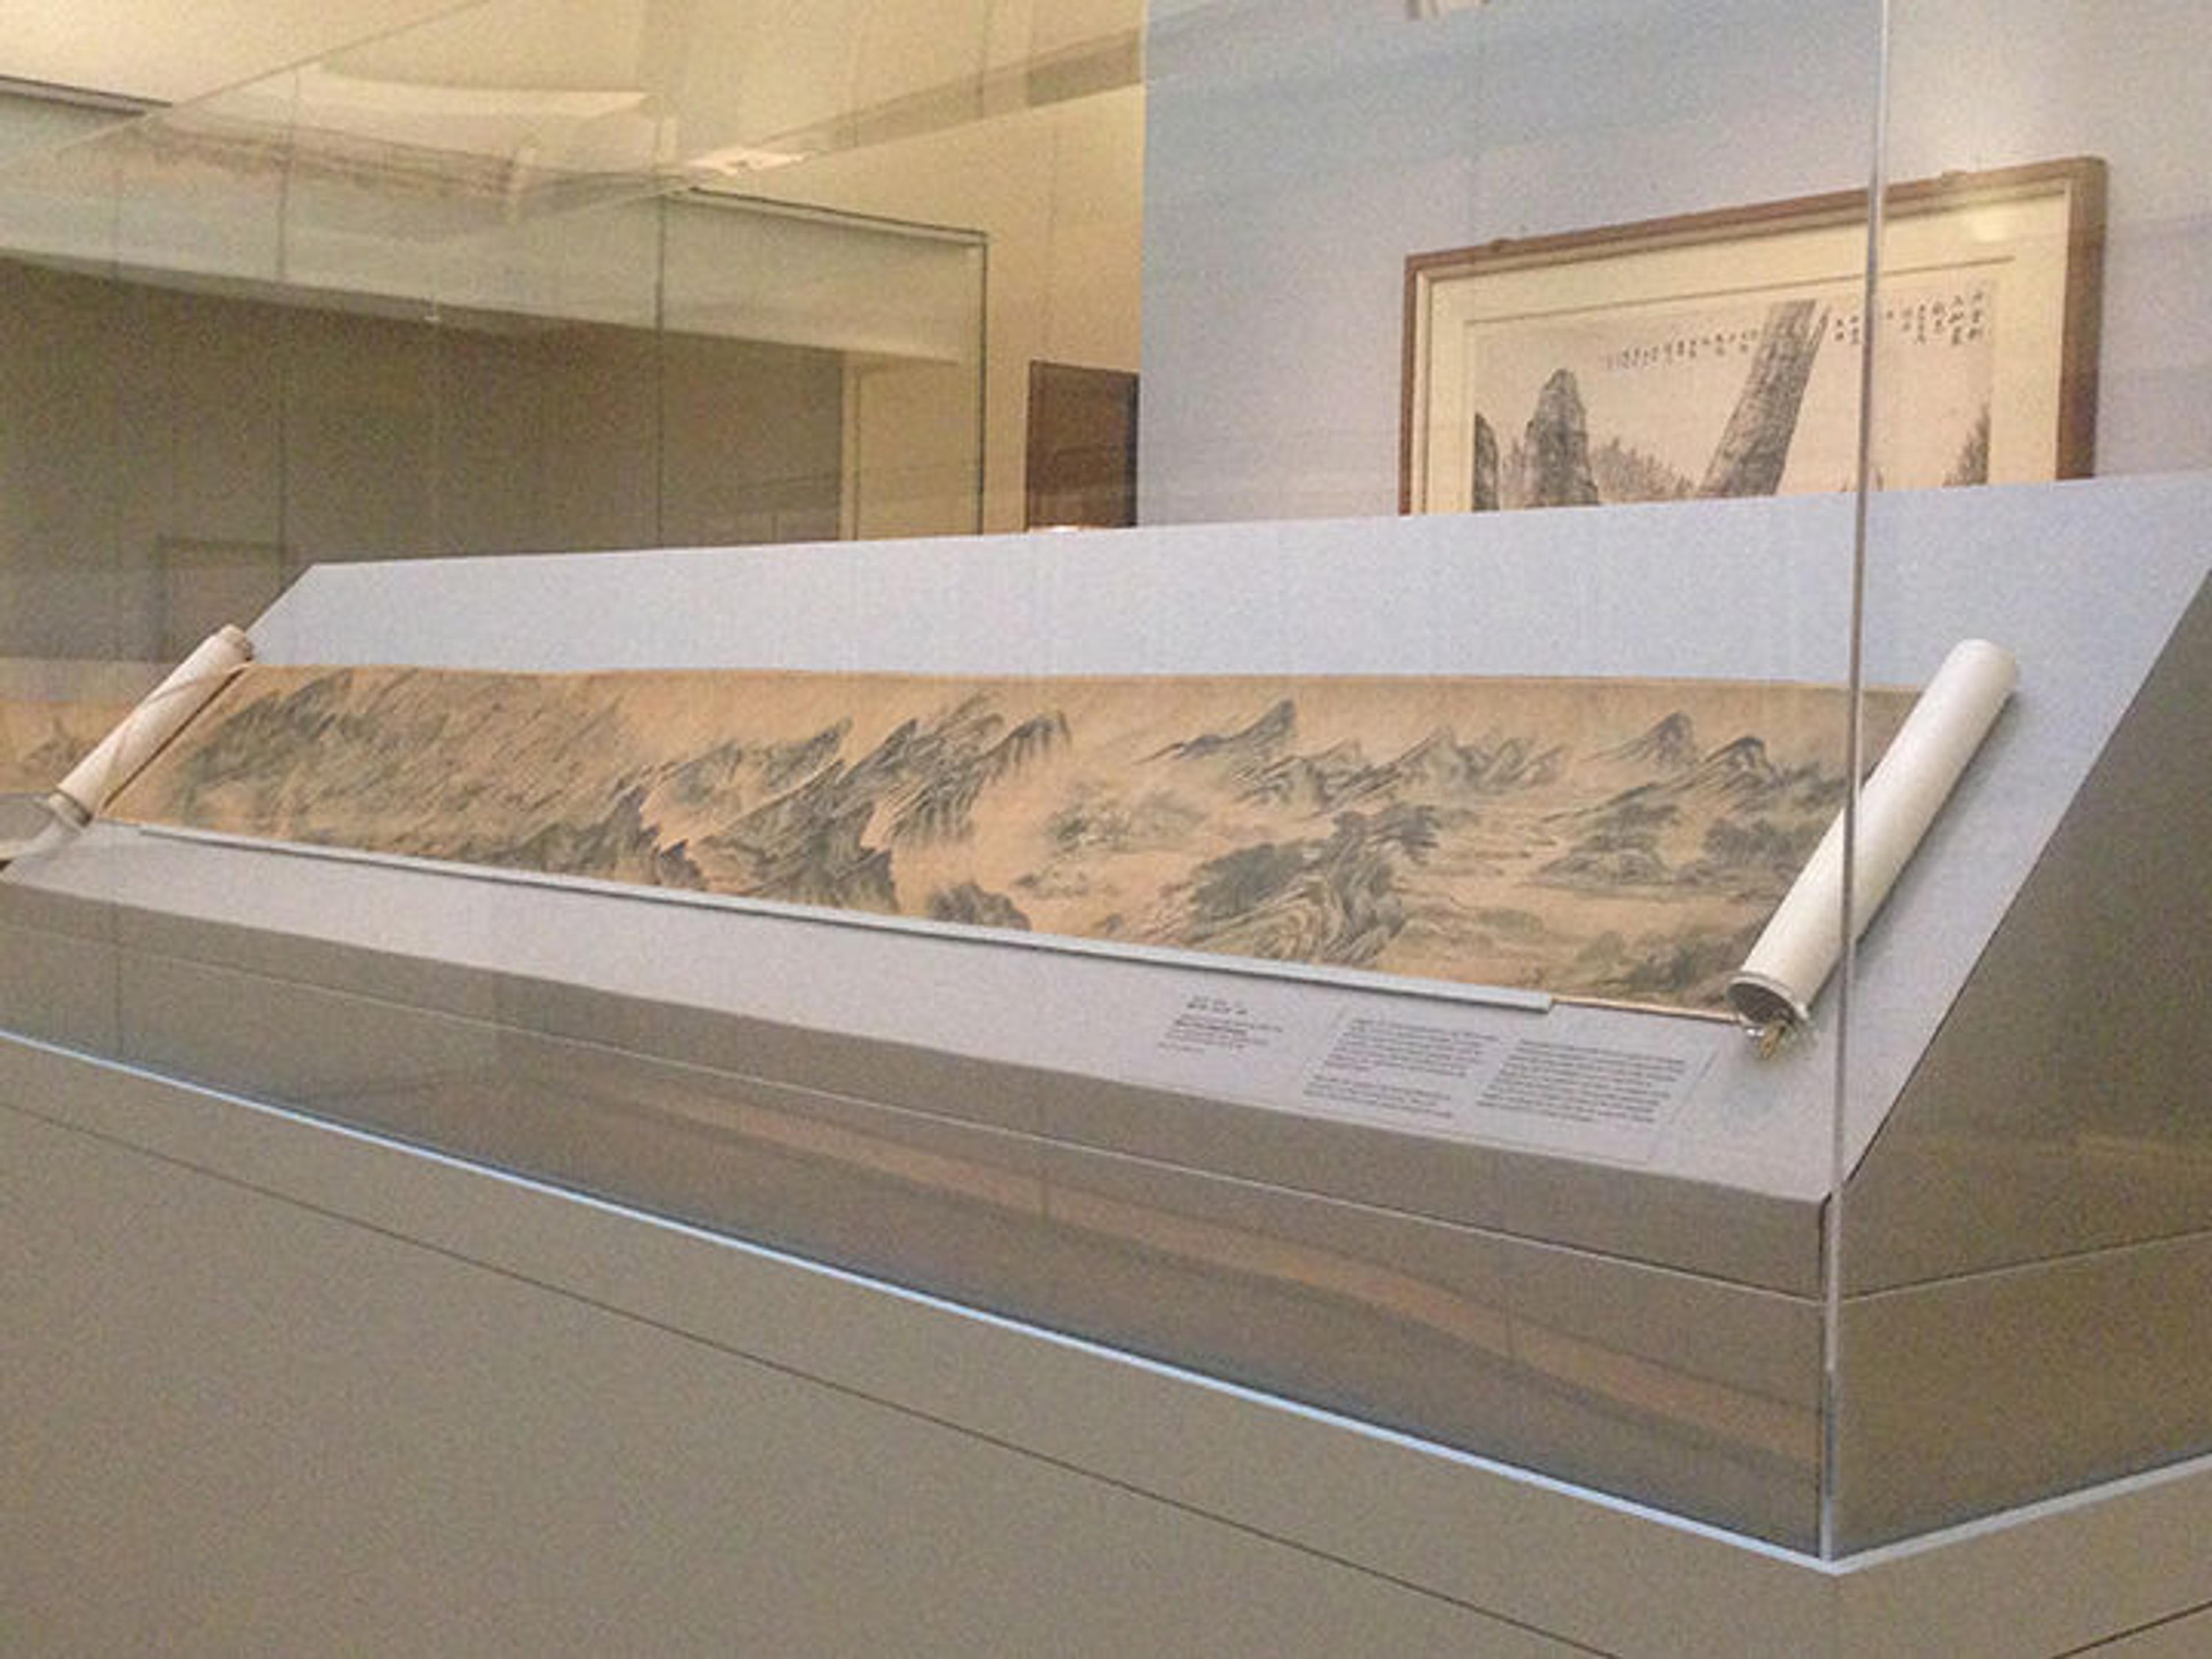 Installation view of long scroll in case